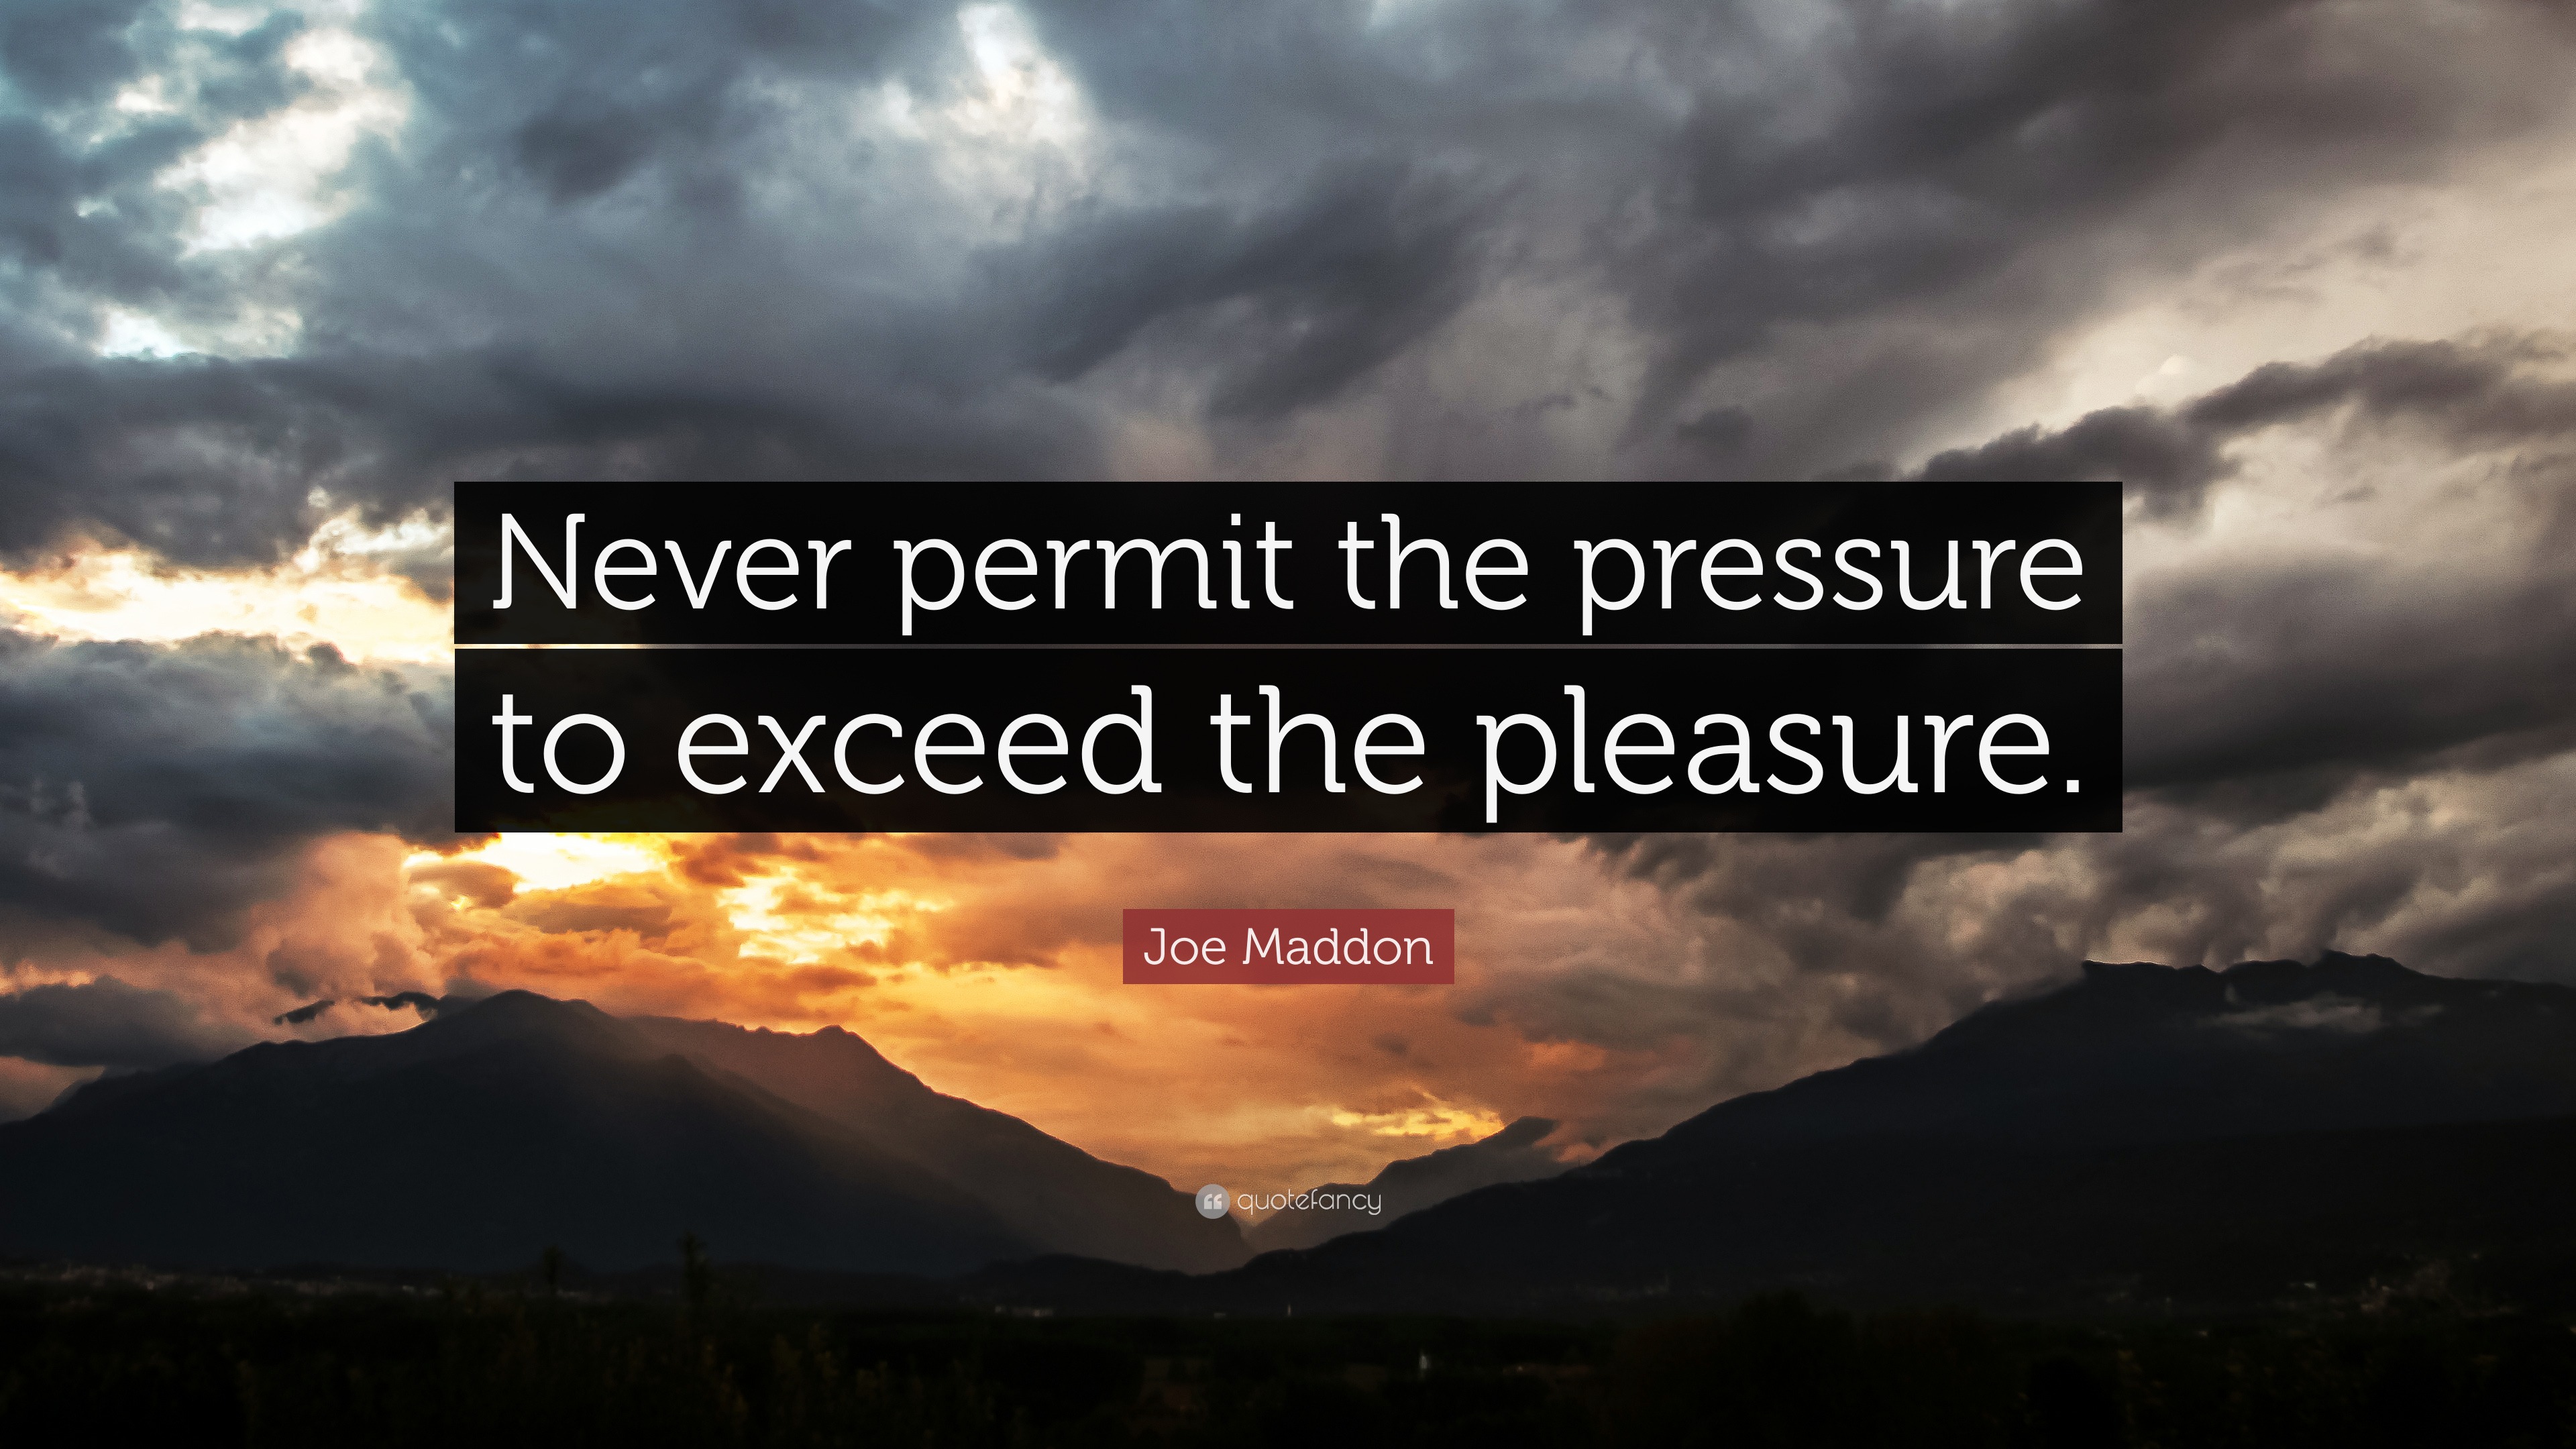 Joe Maddon Quote: “Never permit the pressure to exceed the pleasure.”